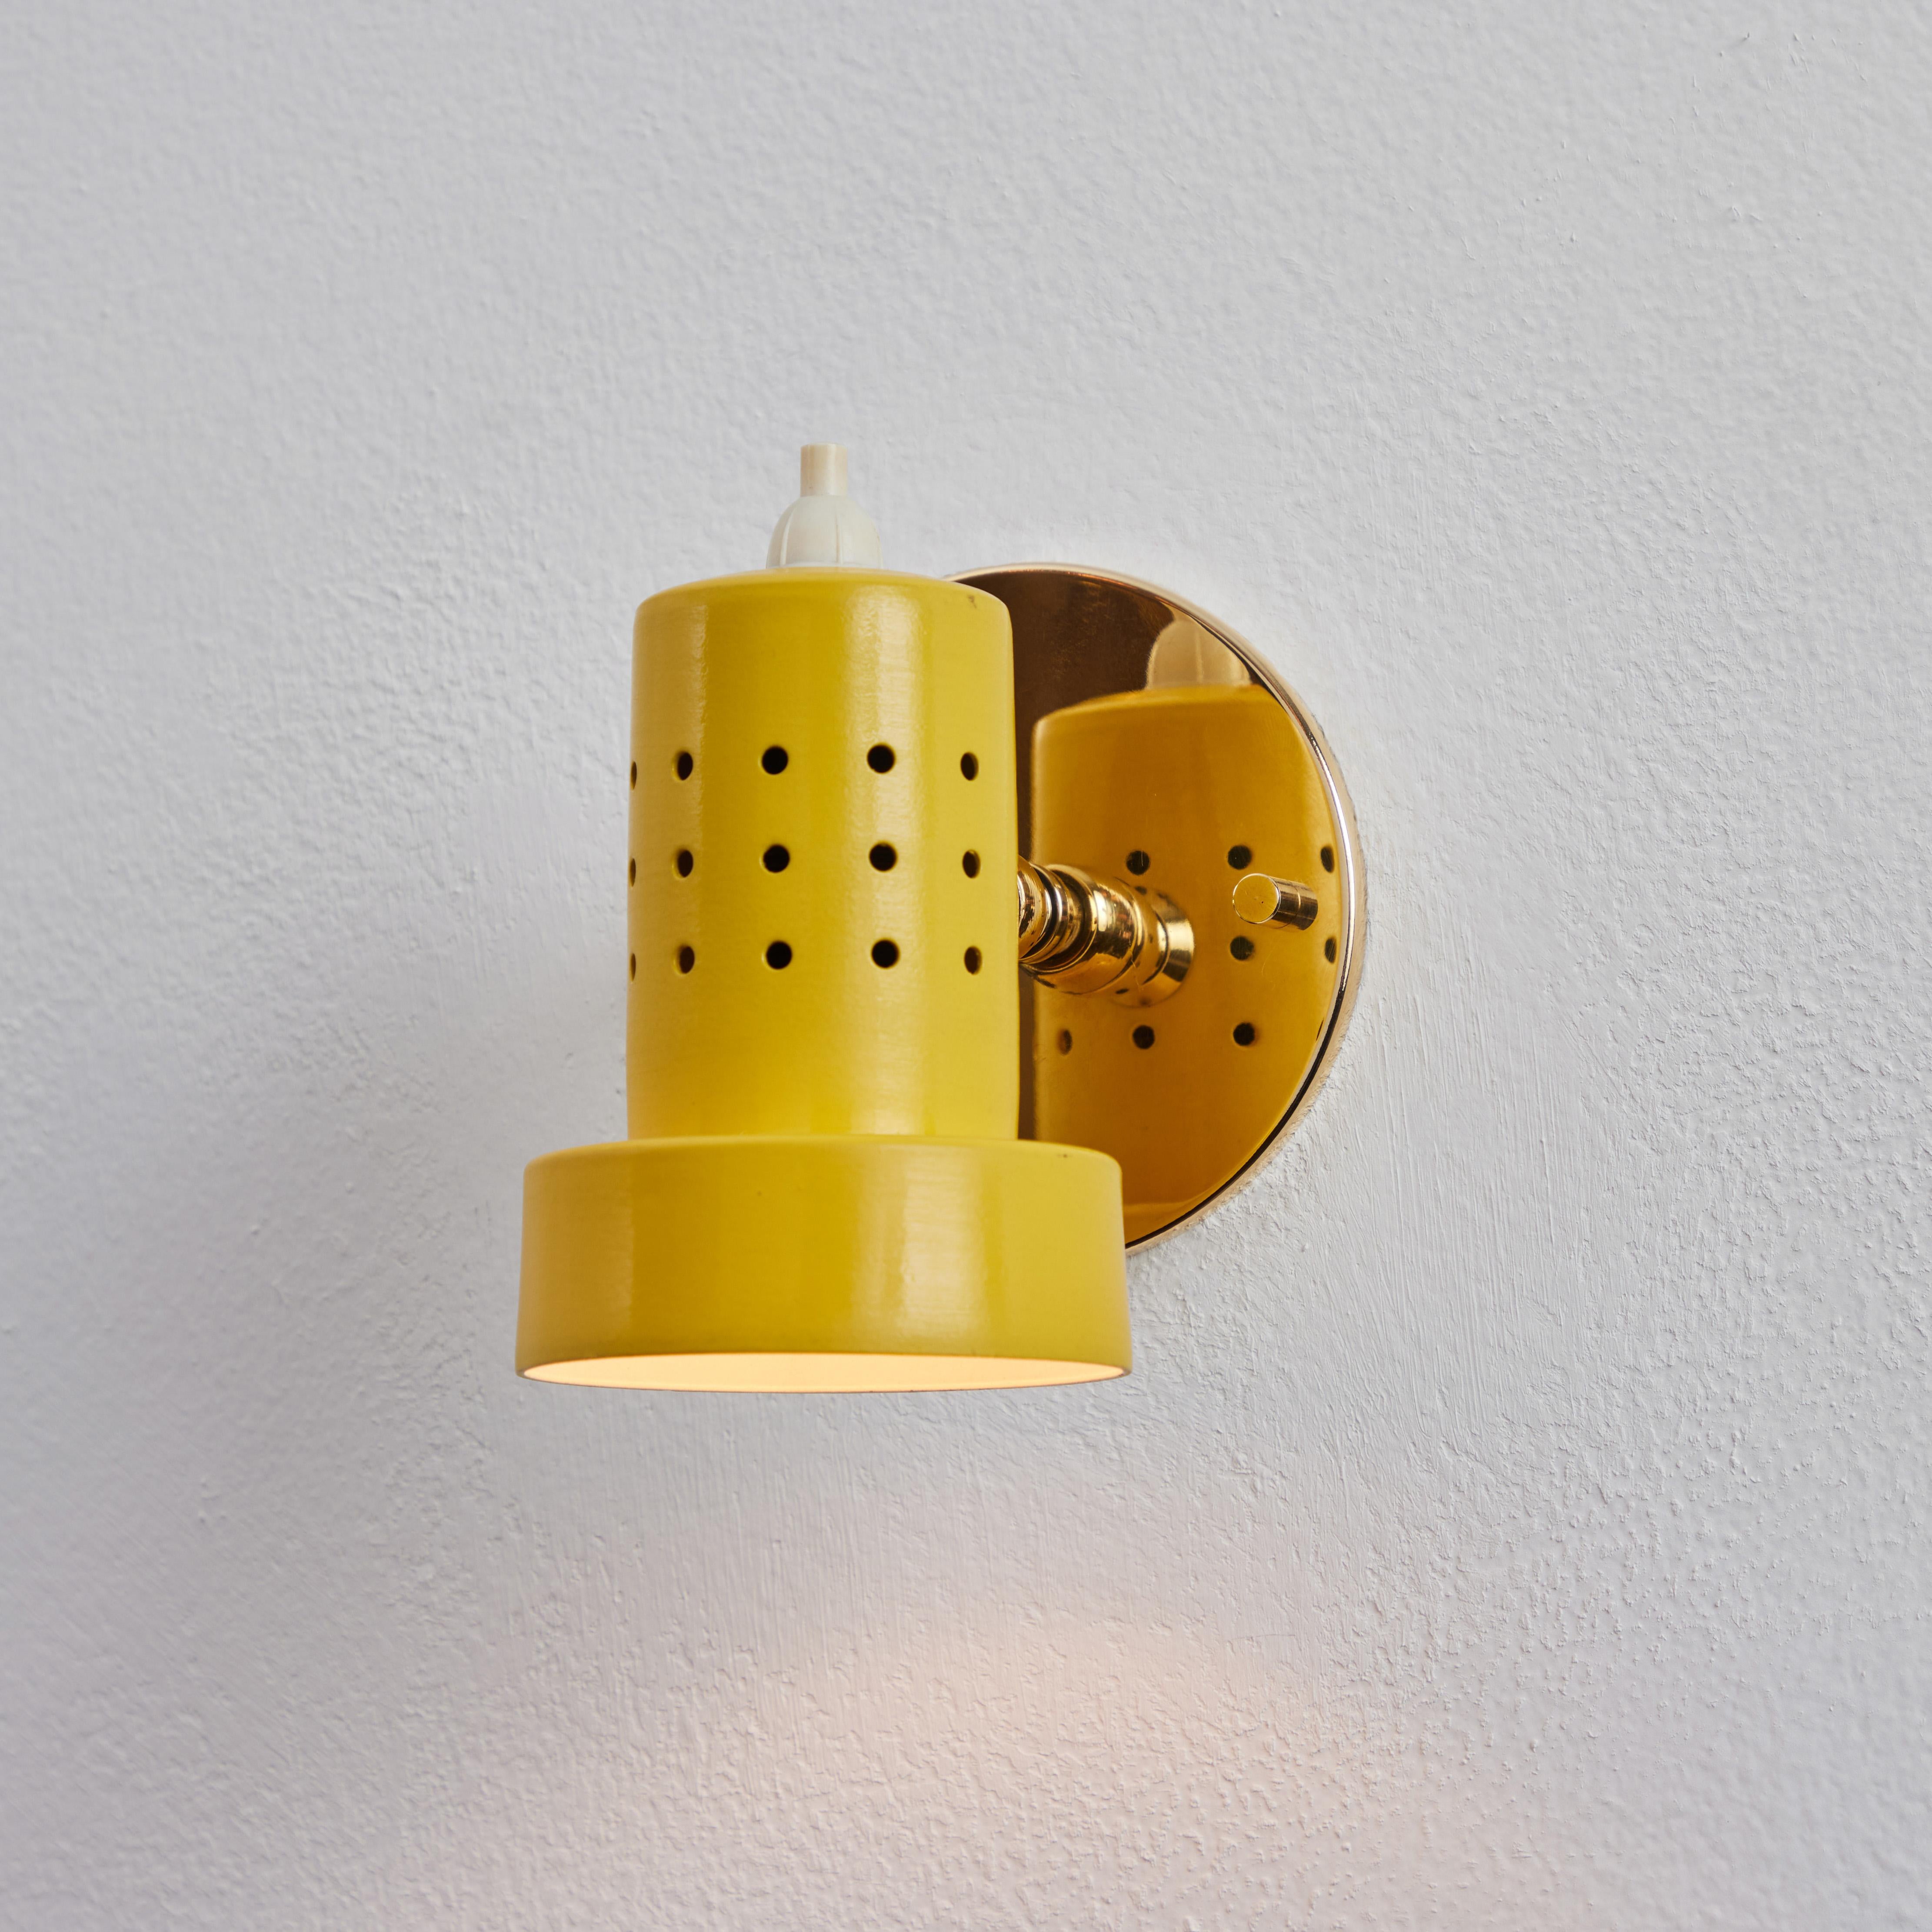 1960s Stilux Milano perforated yellow articulating sconce. Executed in brass and yellow painted metal. These highly adjustable sconces pivot up/down and rotate left/right on a ball joint. Wired for US electrical with custom period style brass